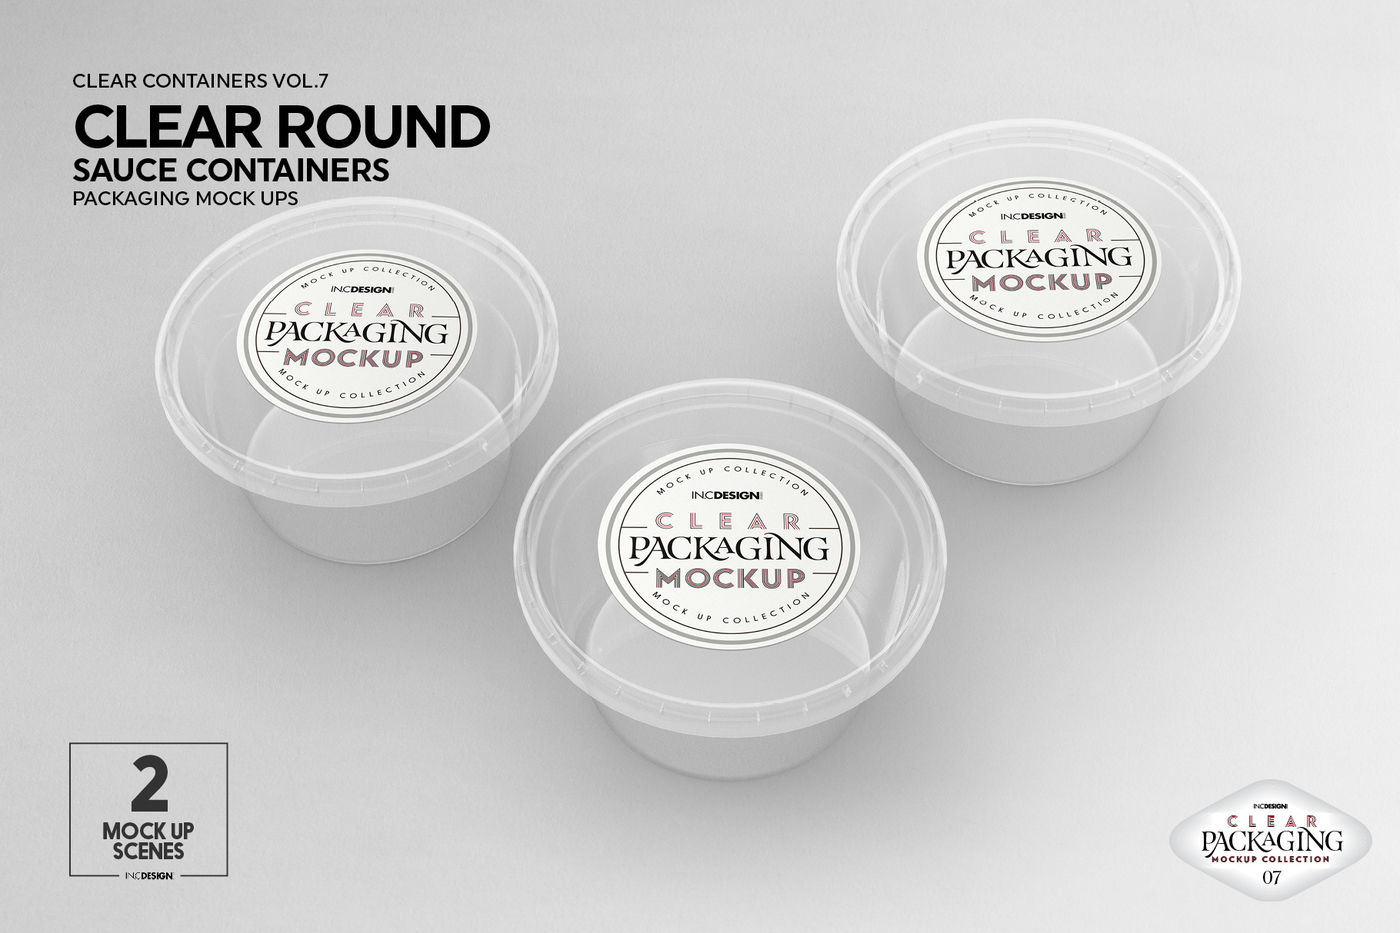 https://media1.thehungryjpeg.com/thumbs2/ori_116683_4fe556f899af80a41118b0fceea2b65e8d709f47_clear-round-sauce-containers-packaging-mockup.jpg